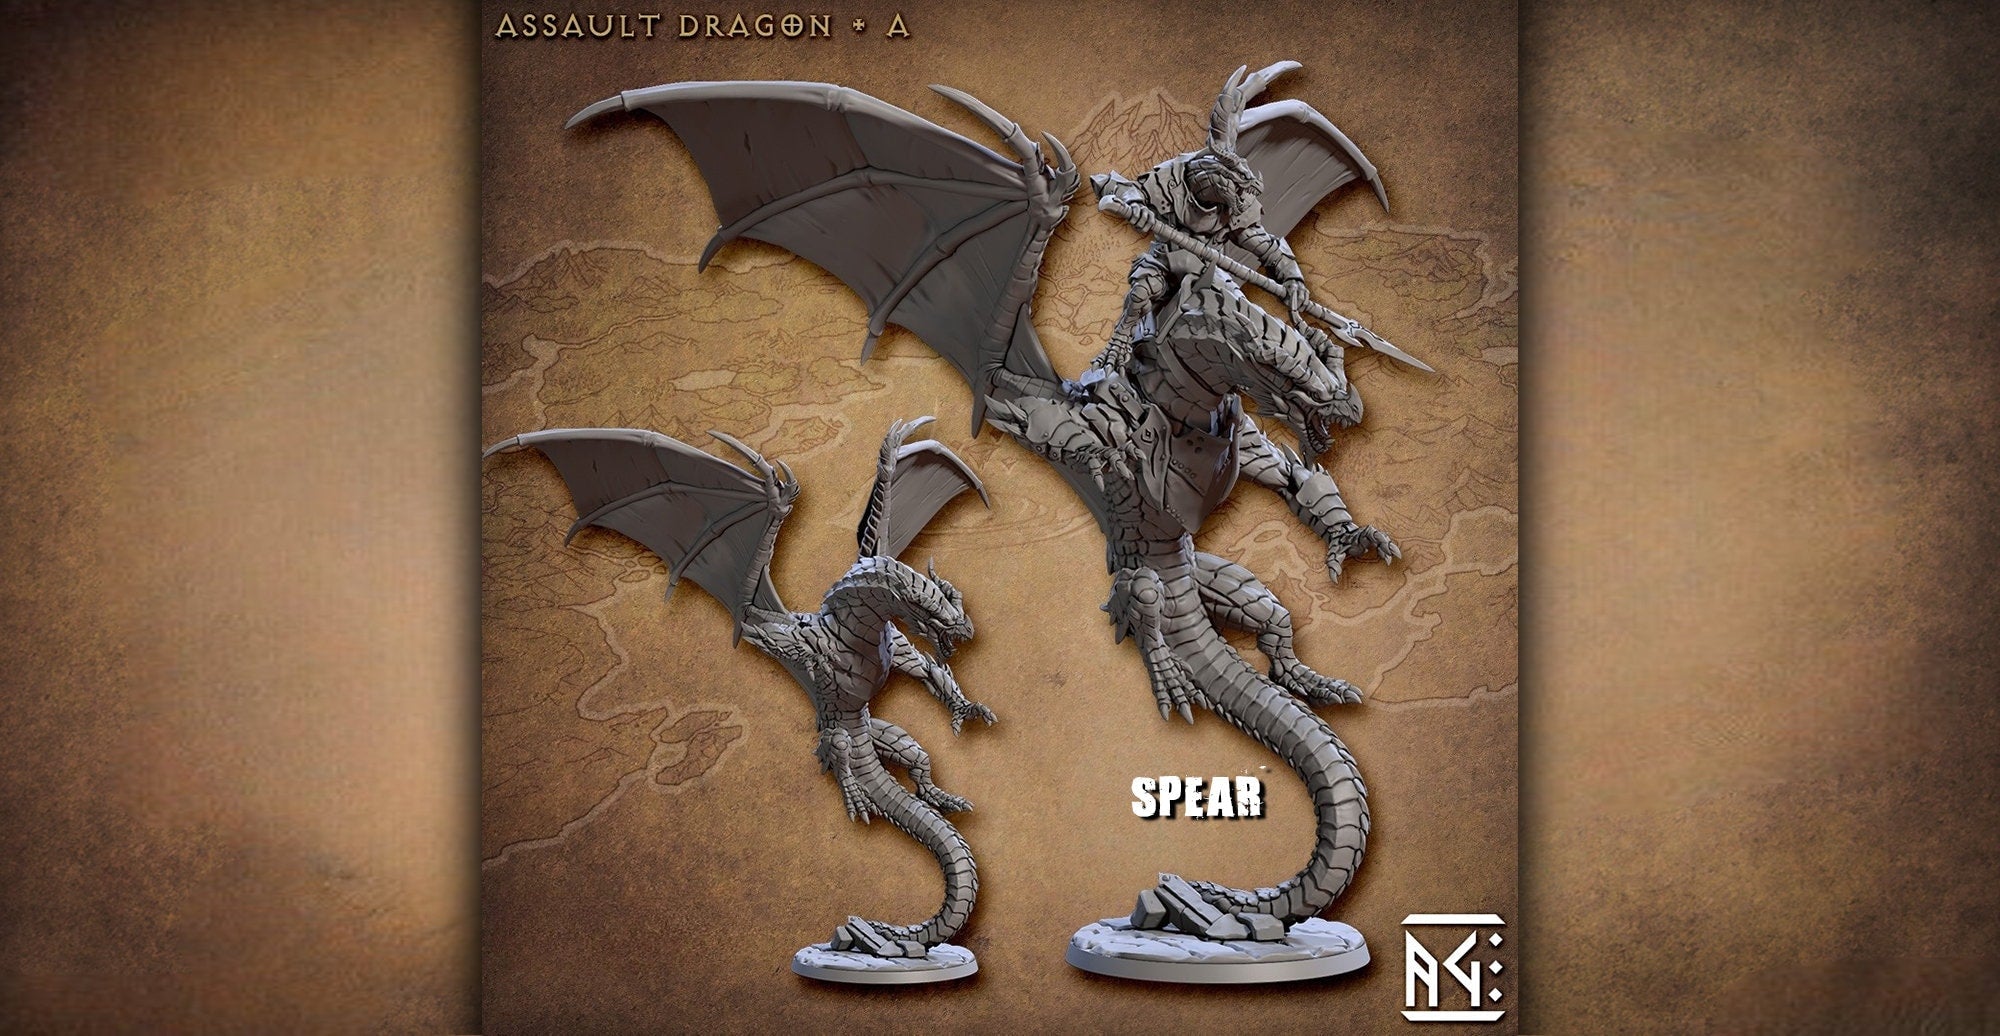 Dragon "Assault Dragon A" (+Rider)-Role Playing Miniatures